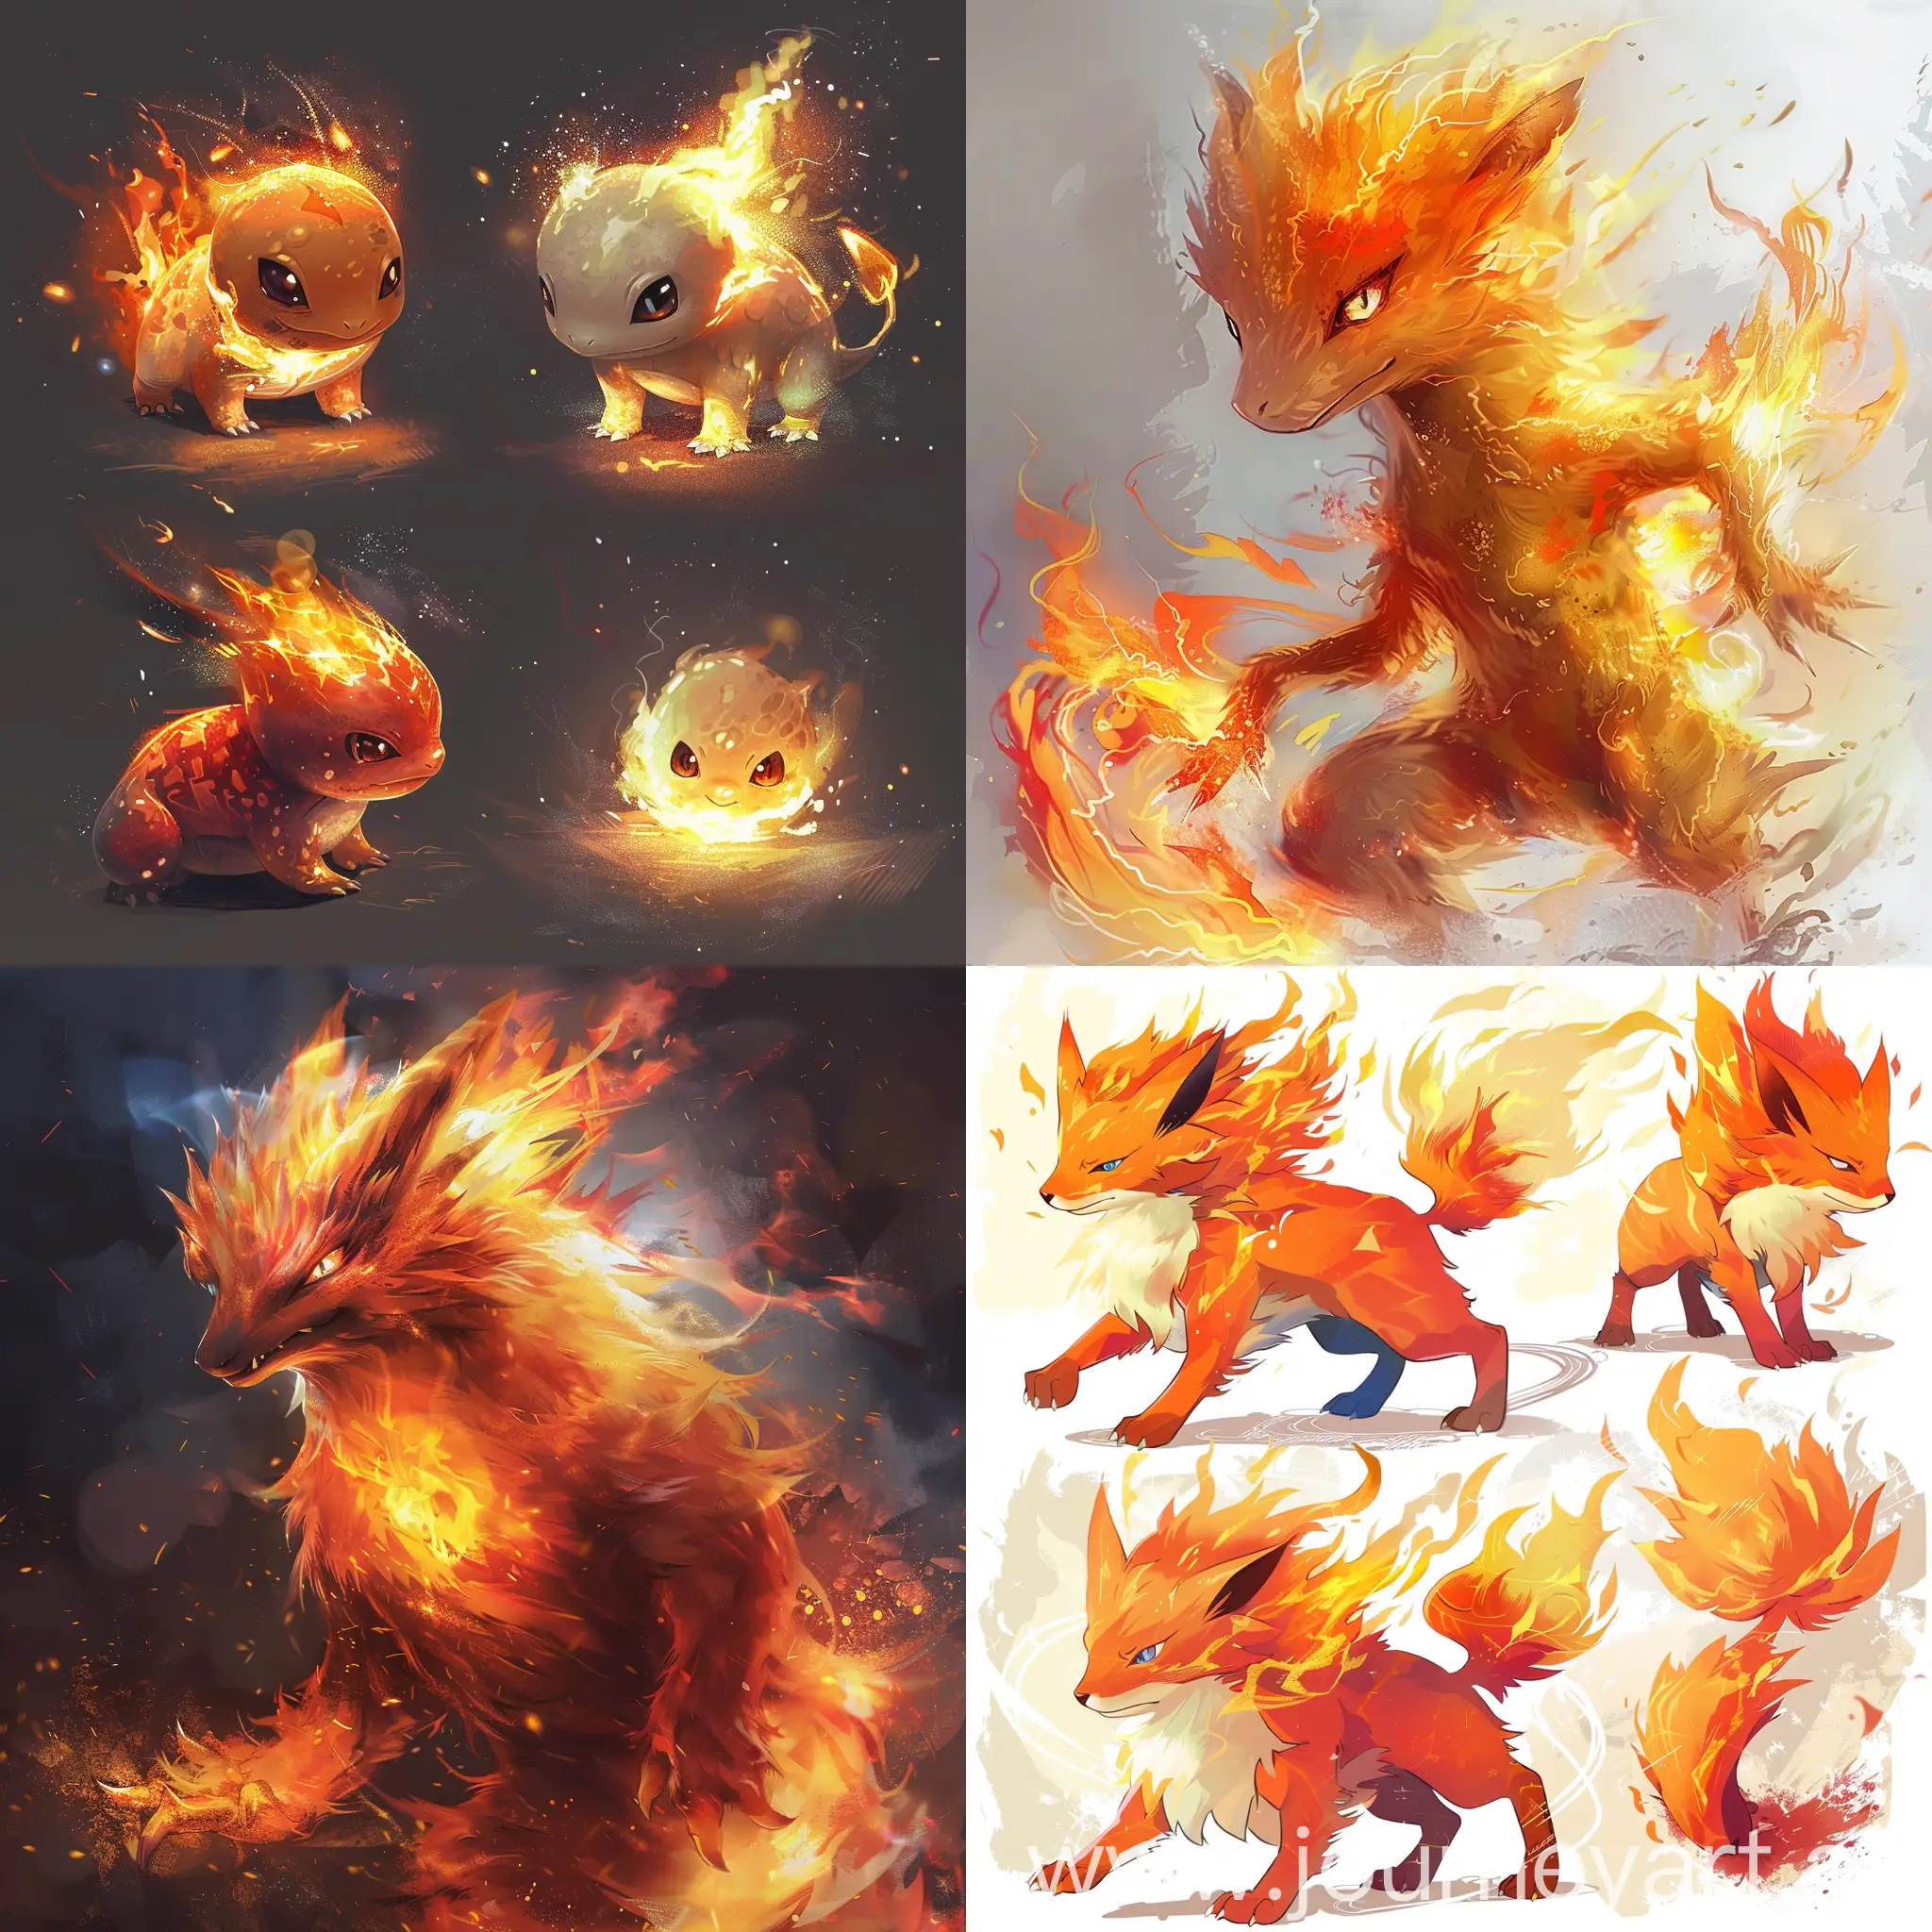 Anime style creatures similar to Pokemon, unique, one hundred, type fire.